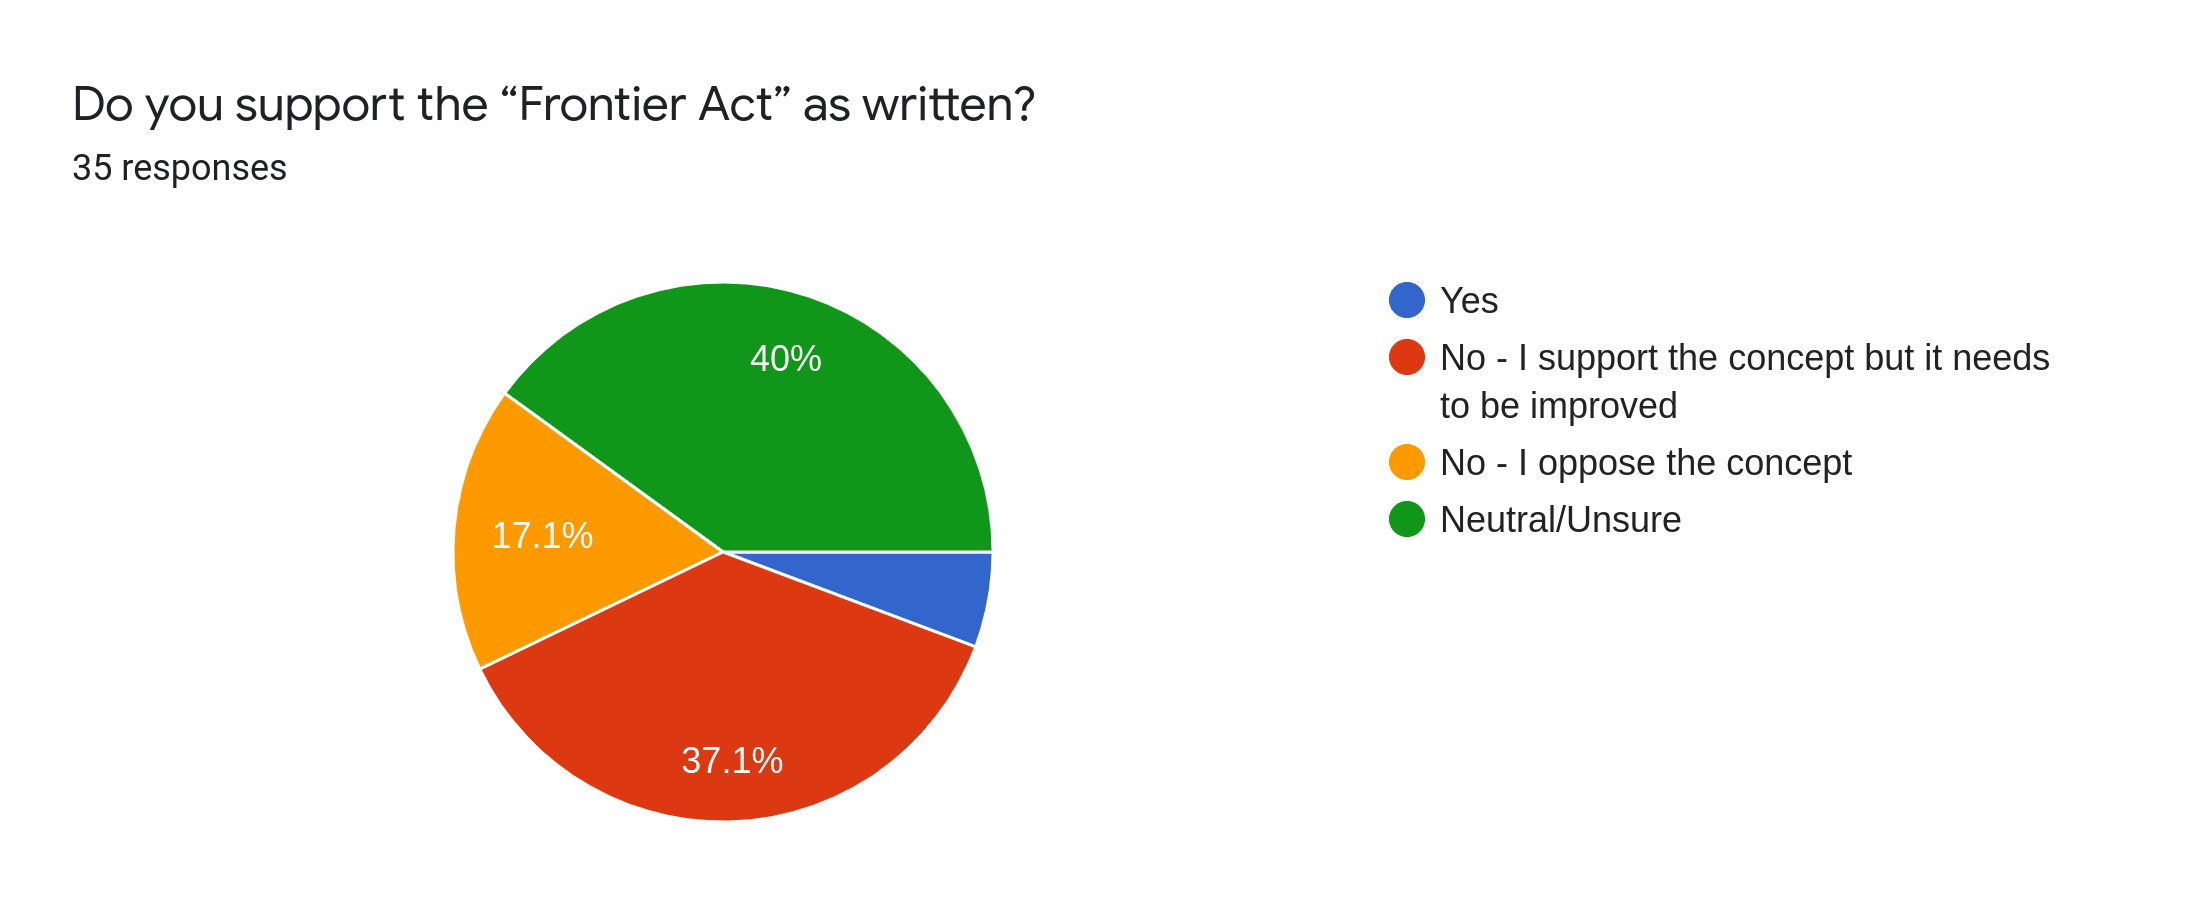 Forms response chart. Question title: Do you support the “Frontier Act” as written?. Number of responses: 35 responses.